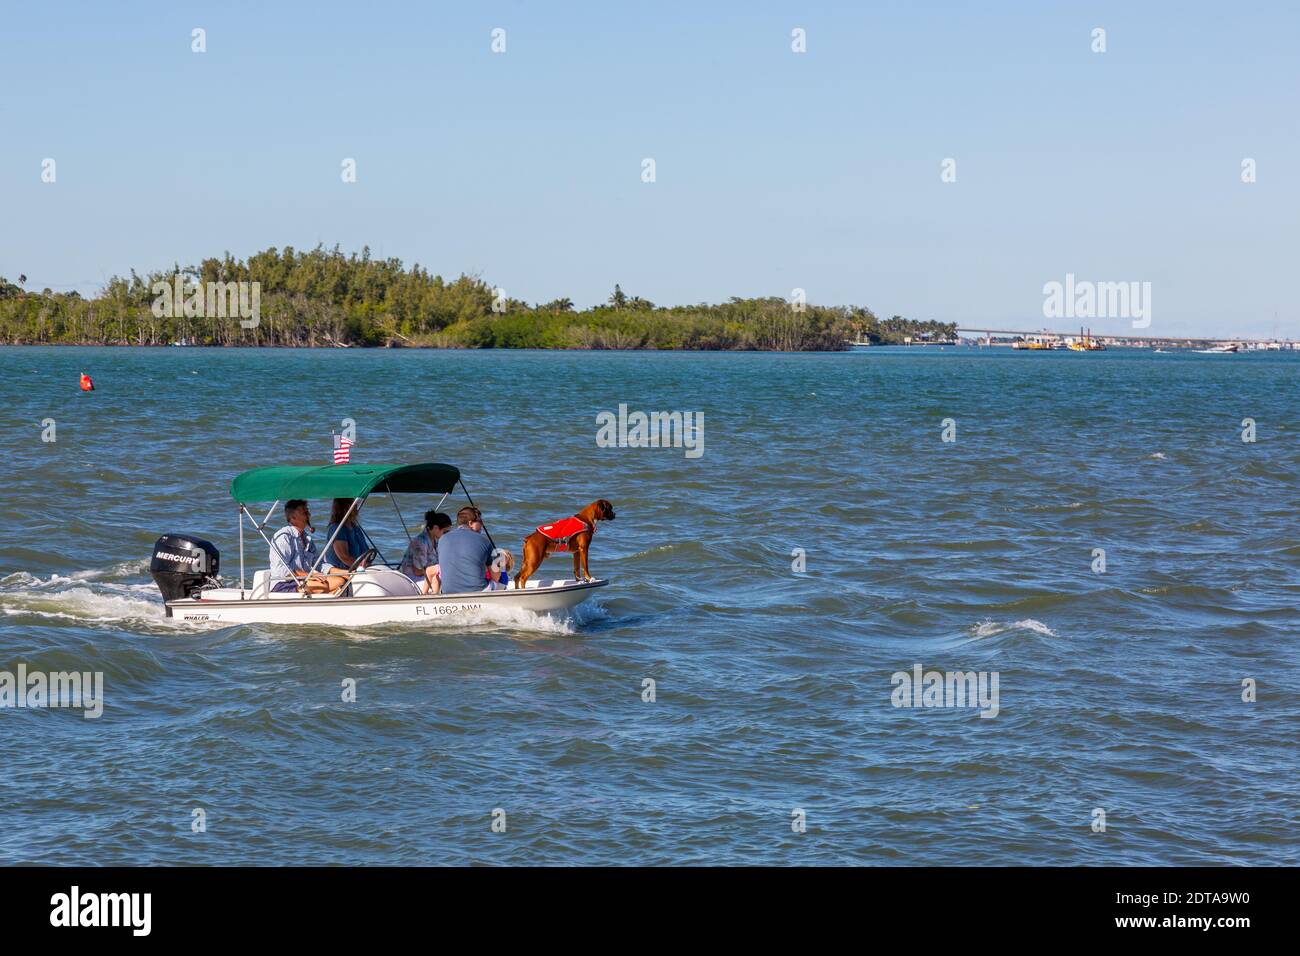 A safety conscious boxer shows the way as this family's small boat plies the waters of the St. Lucie River near Port Salerno, Florida, USA. Stock Photo